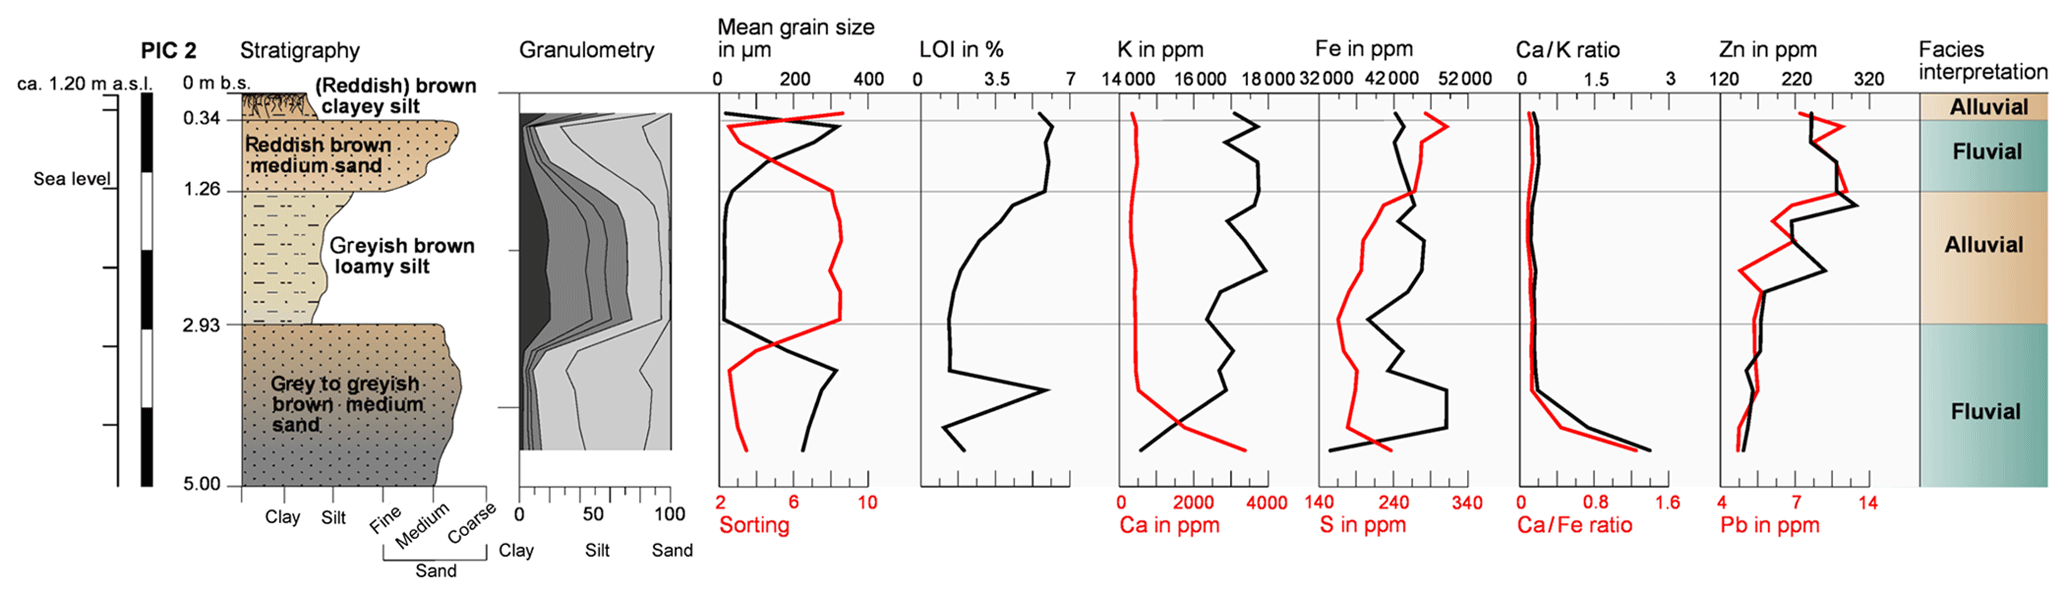 Radiocarbon dating upper lower limits